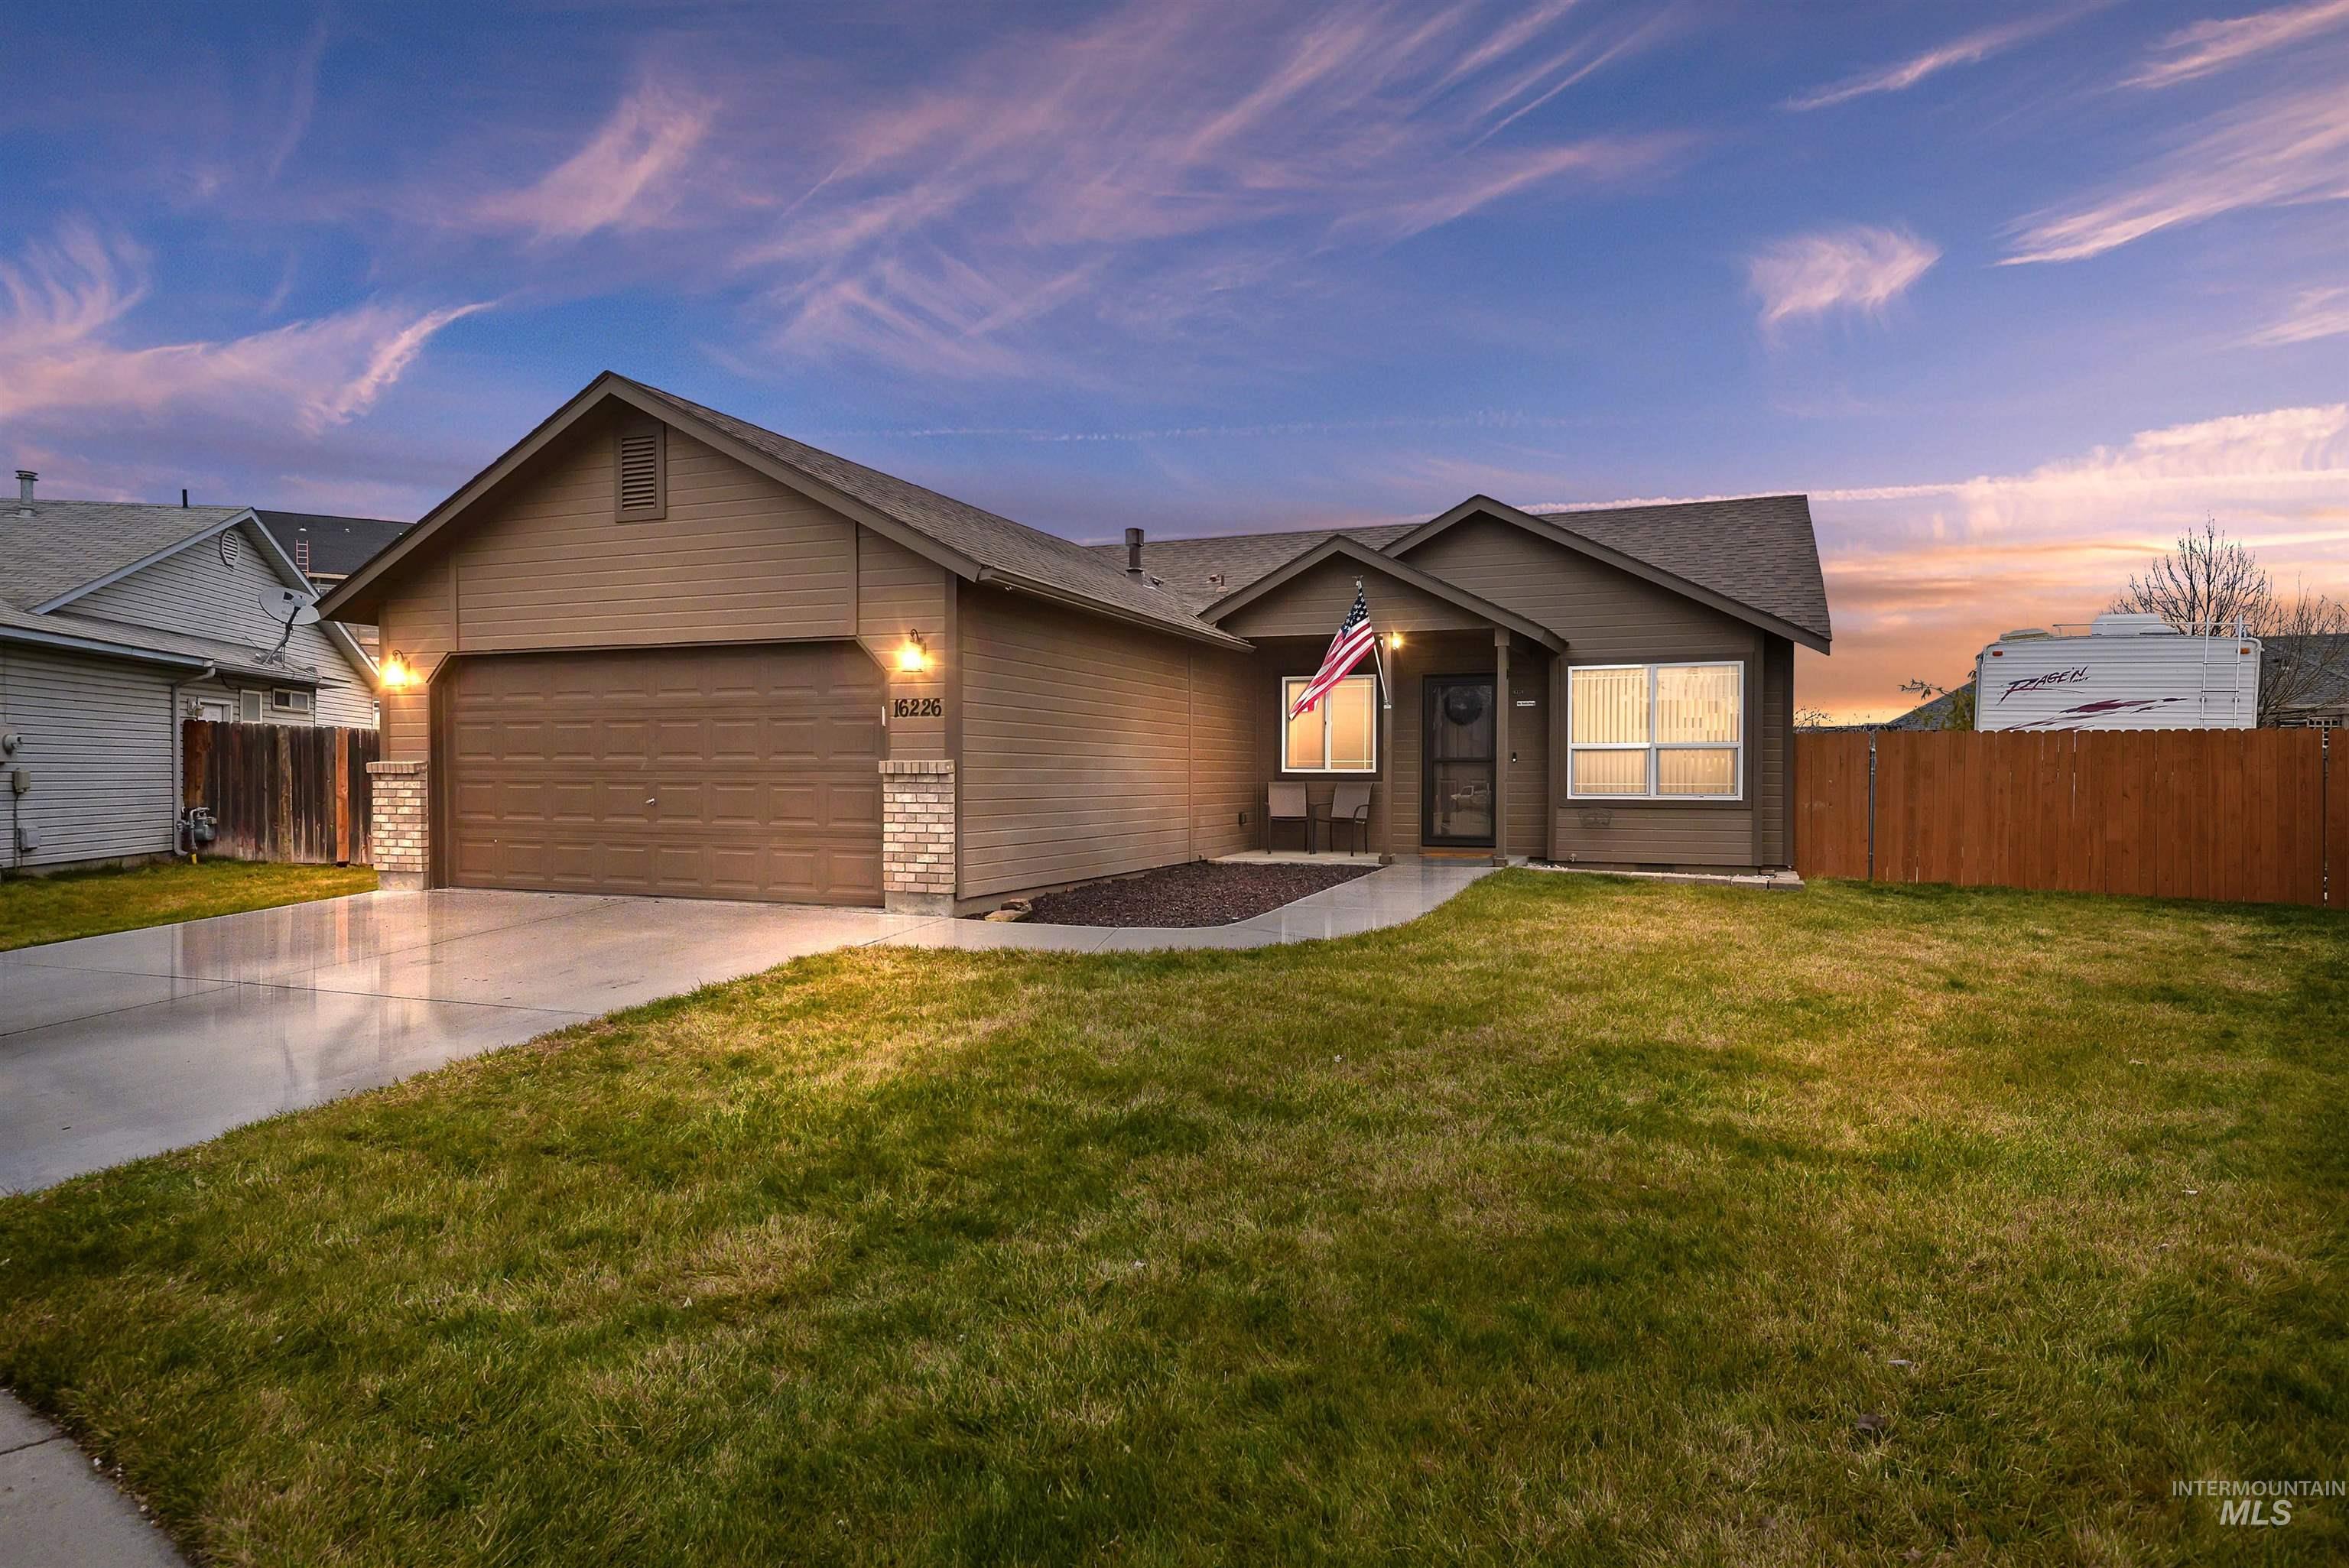 16226 Beckley Ct., Nampa, ID 83687